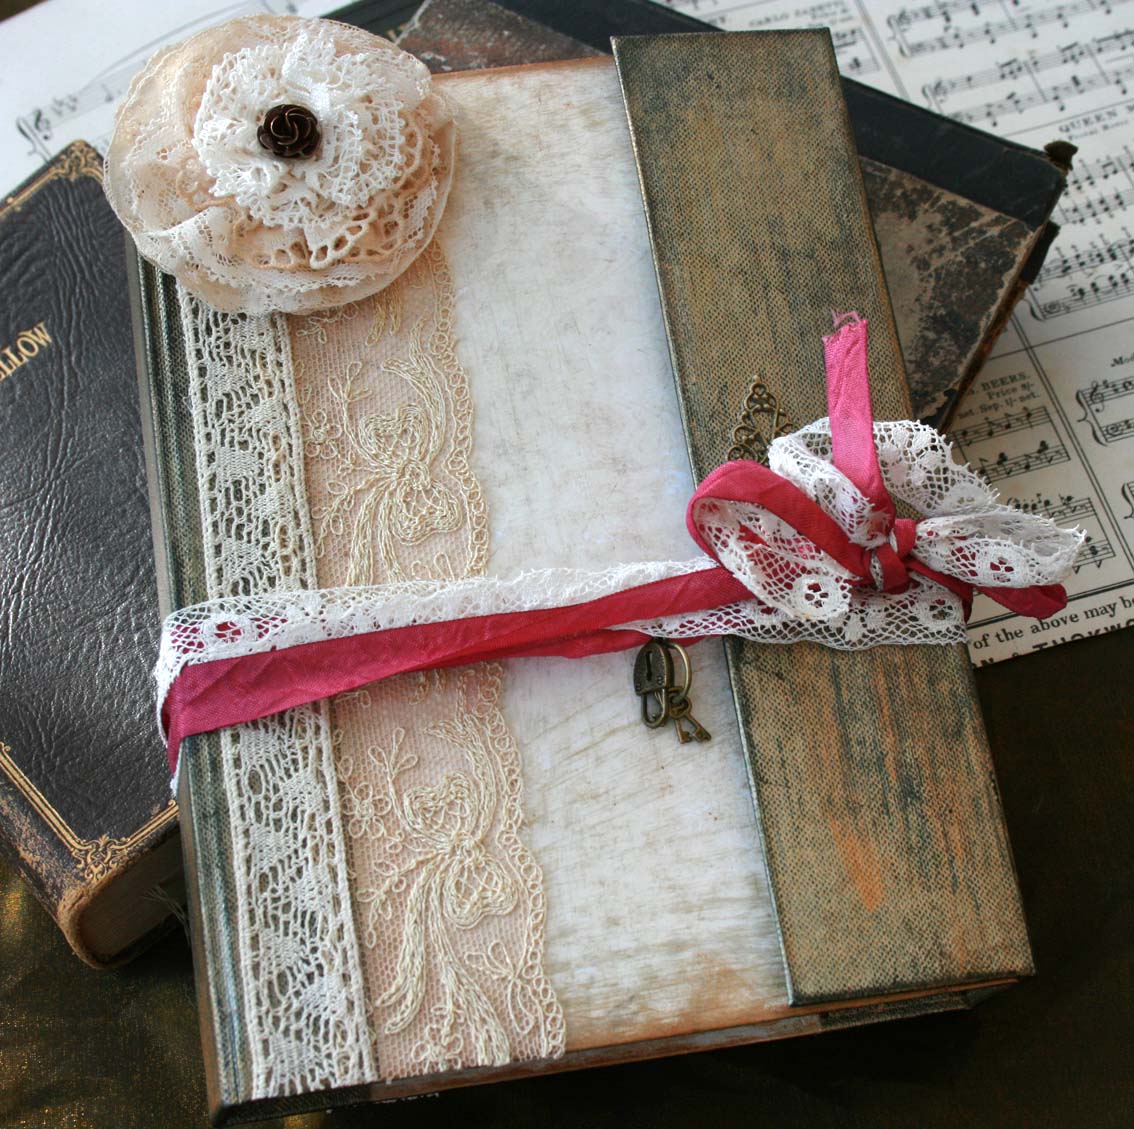 This wonderful beautiful unique "Wedding planner journal" is a handmade item.It is an essential for any bride to be